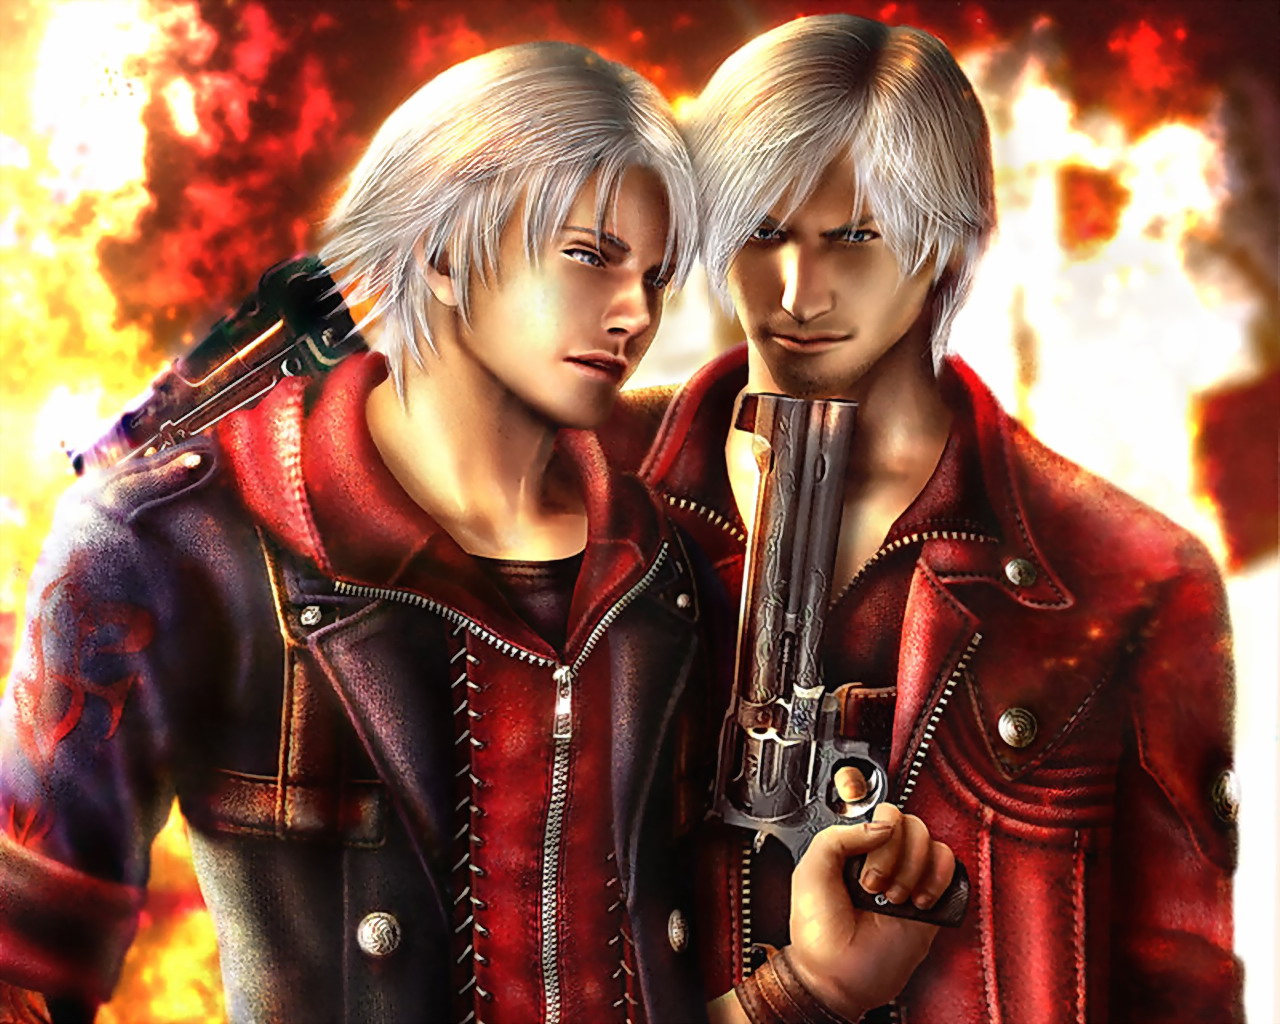 Devil May Cry Computer Wallpapers, Desktop Backgrounds